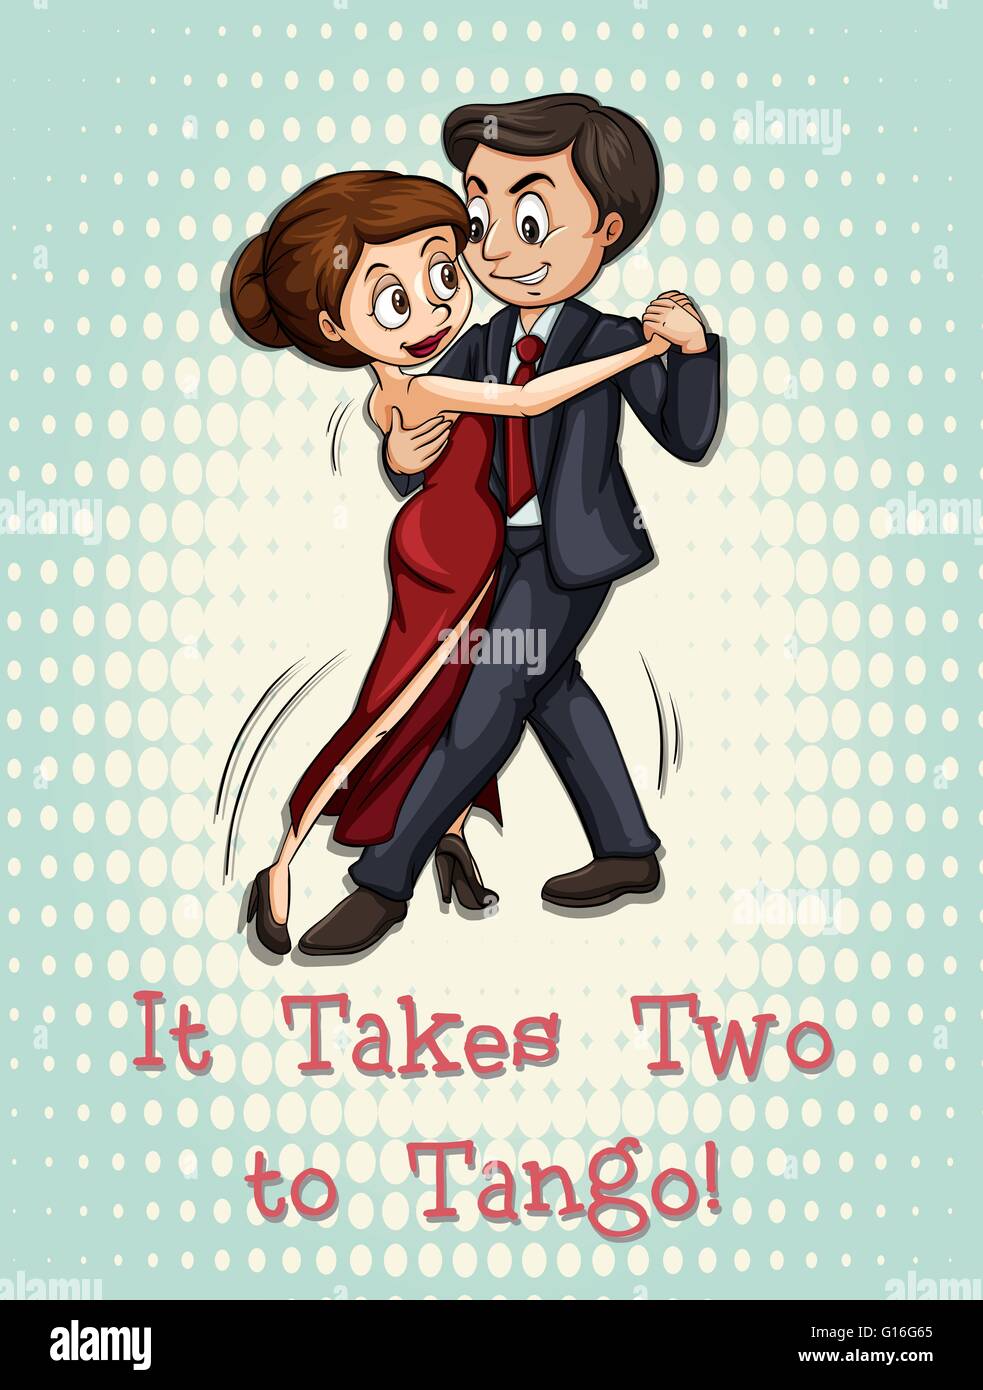 Idiom illustration of it takes two to tango Stock Vector